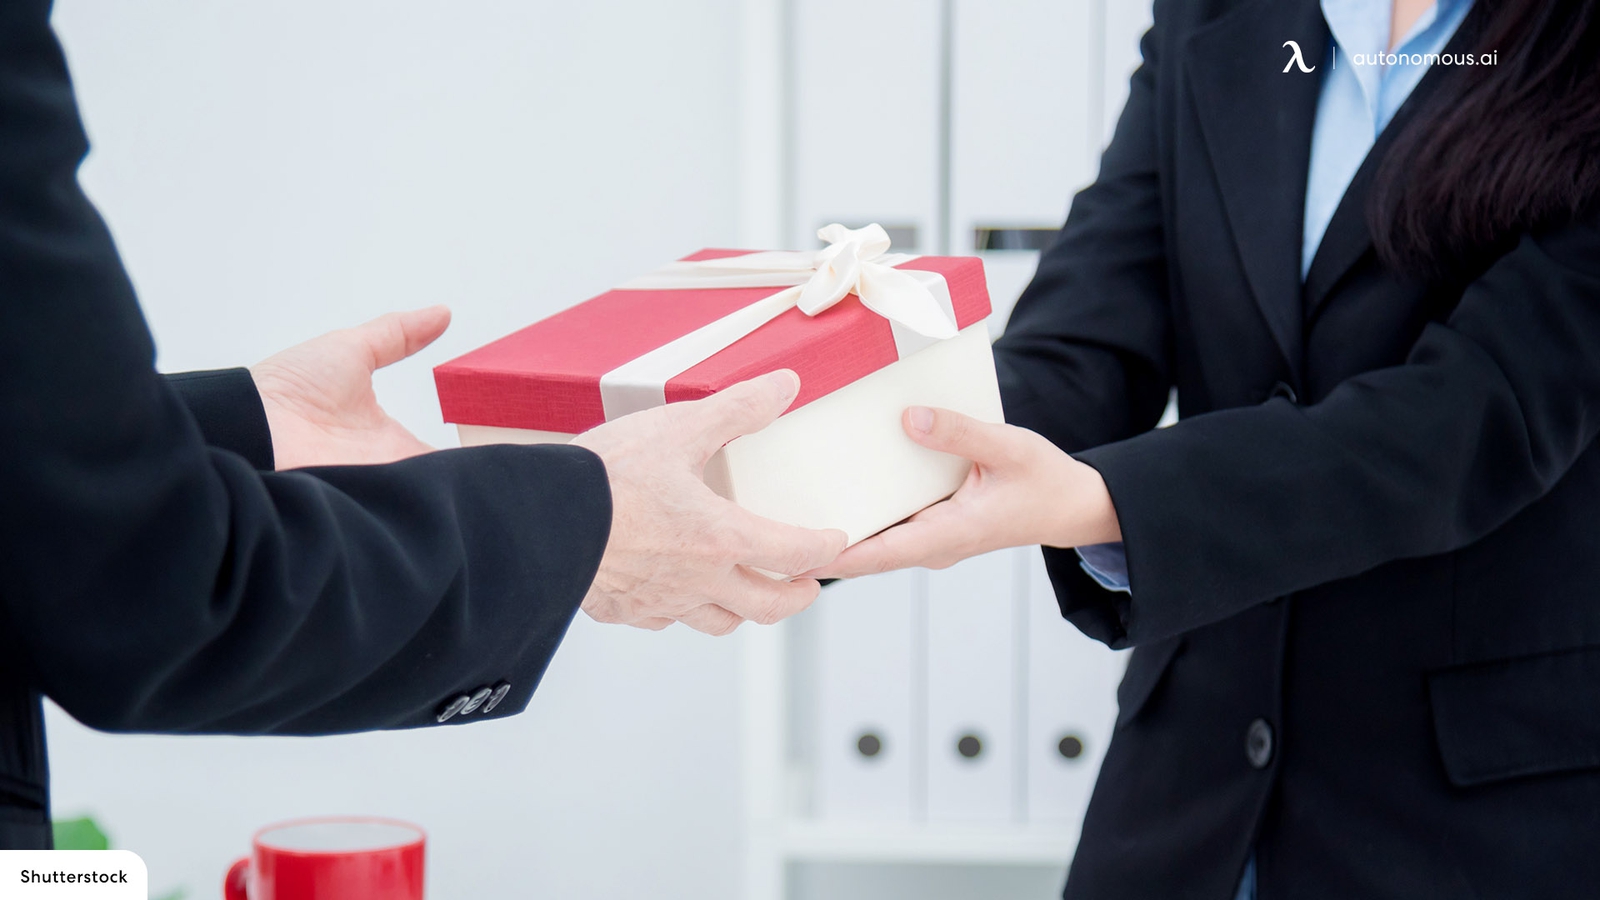 25 Employee Recognition Gift Ideas to Show Your Appreciation